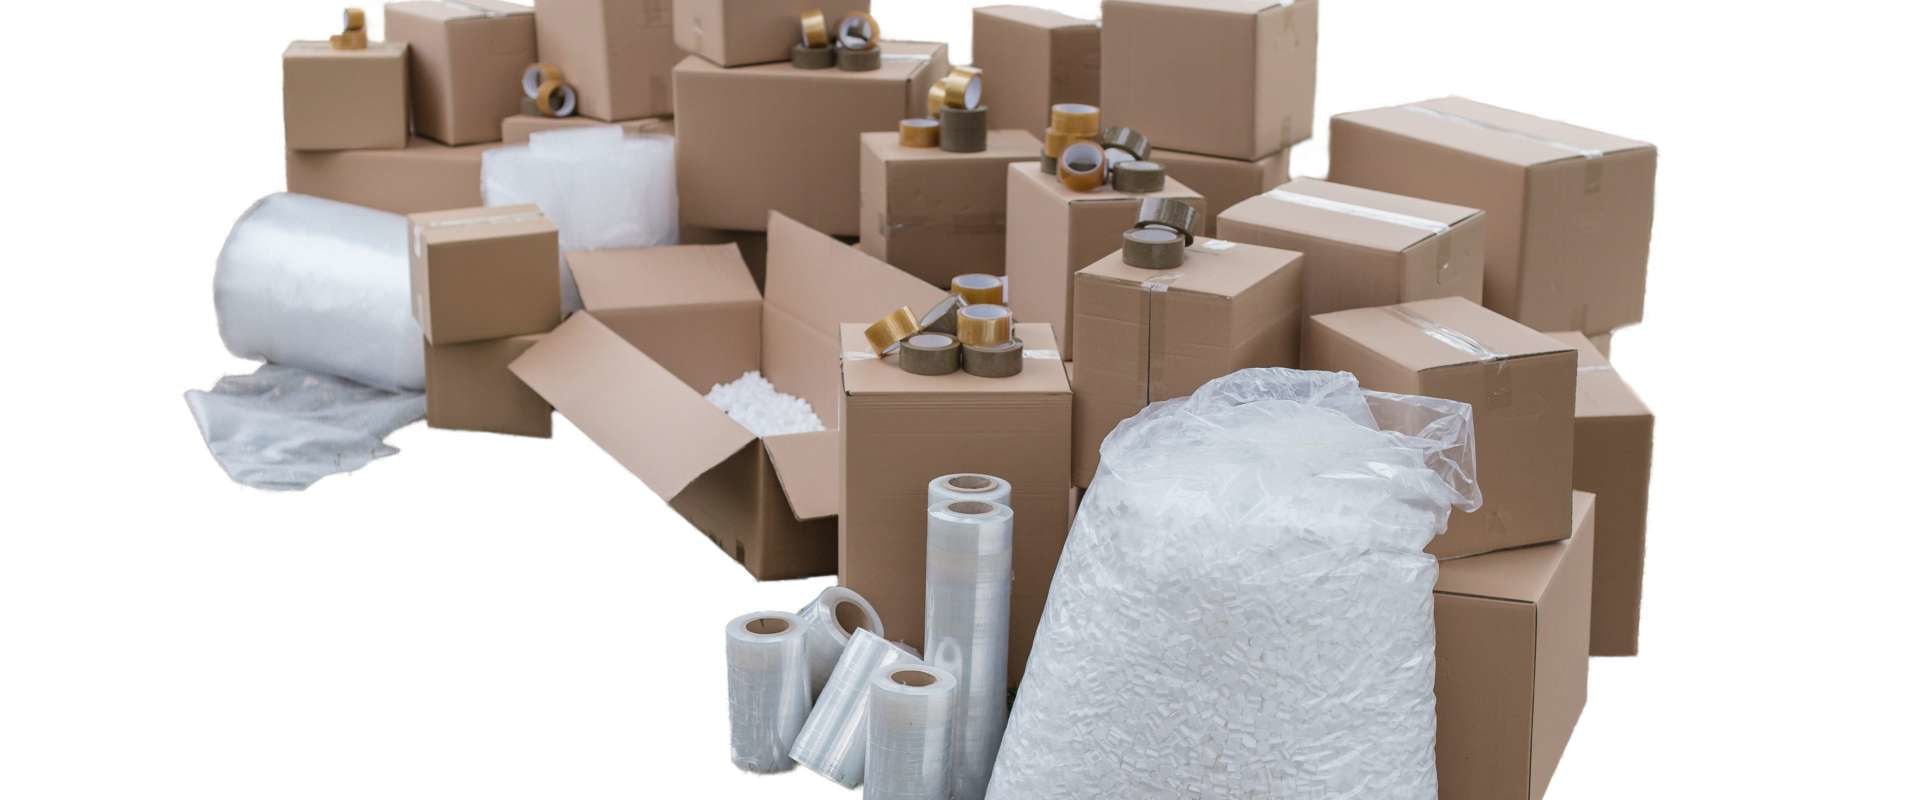 The Role of Moving Companies: What Supplies or Equipment Do You Need to Provide?